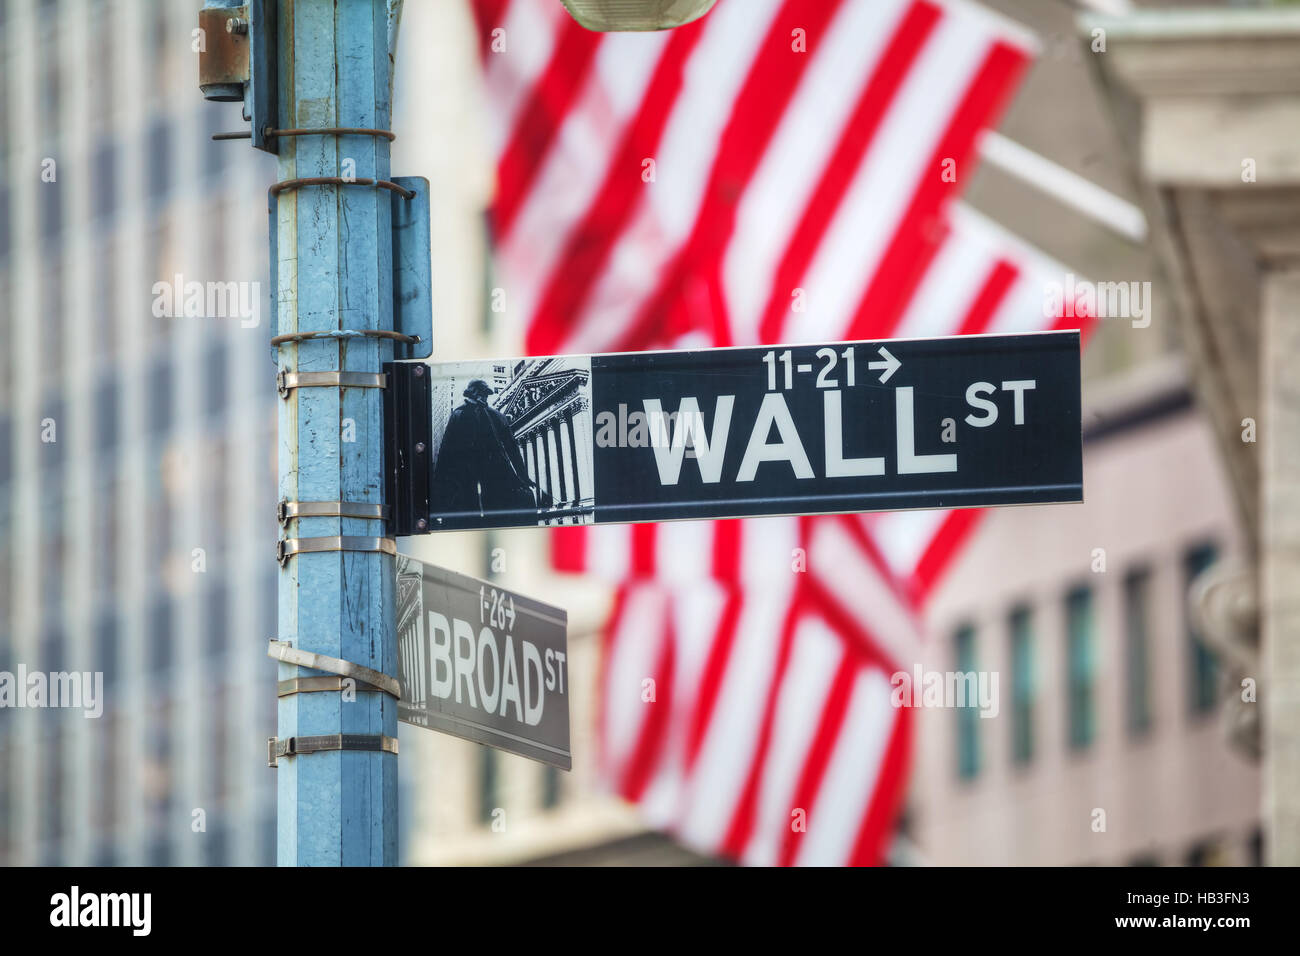 Wall street sign in New York City Stock Photo